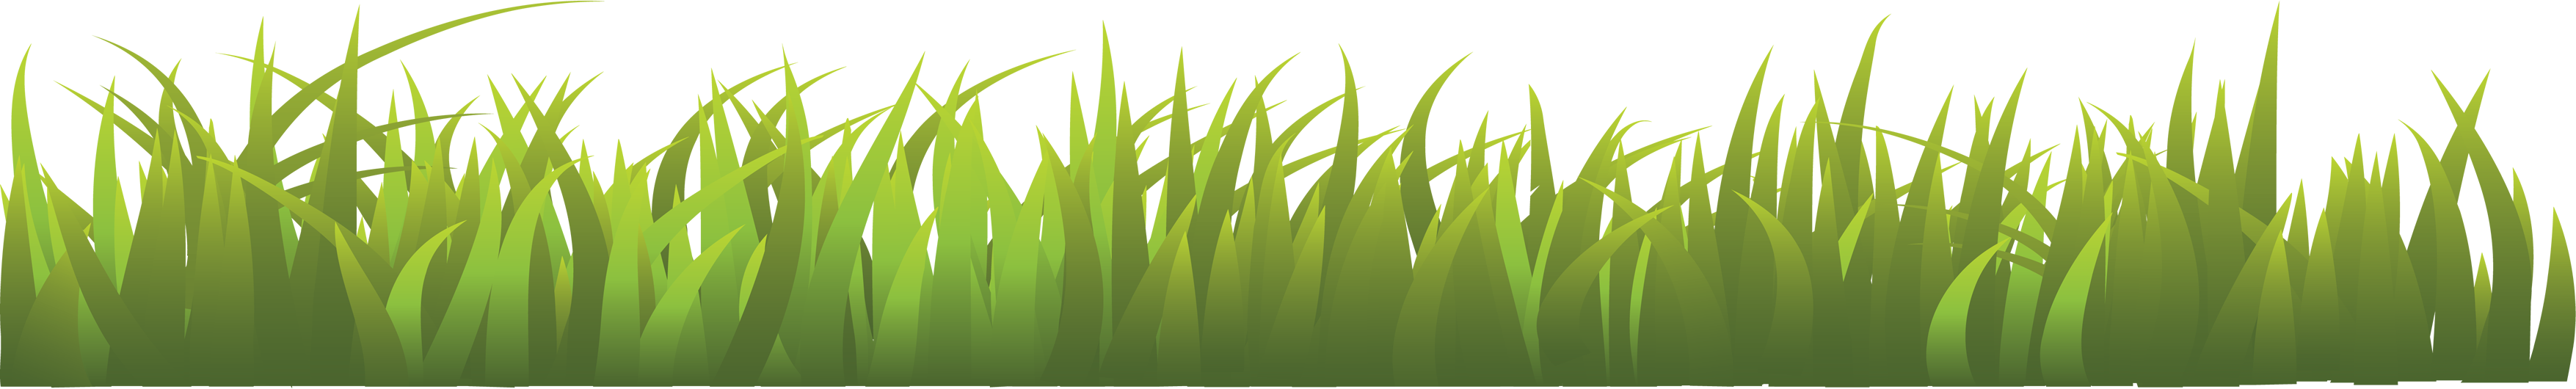 Grass PNG images